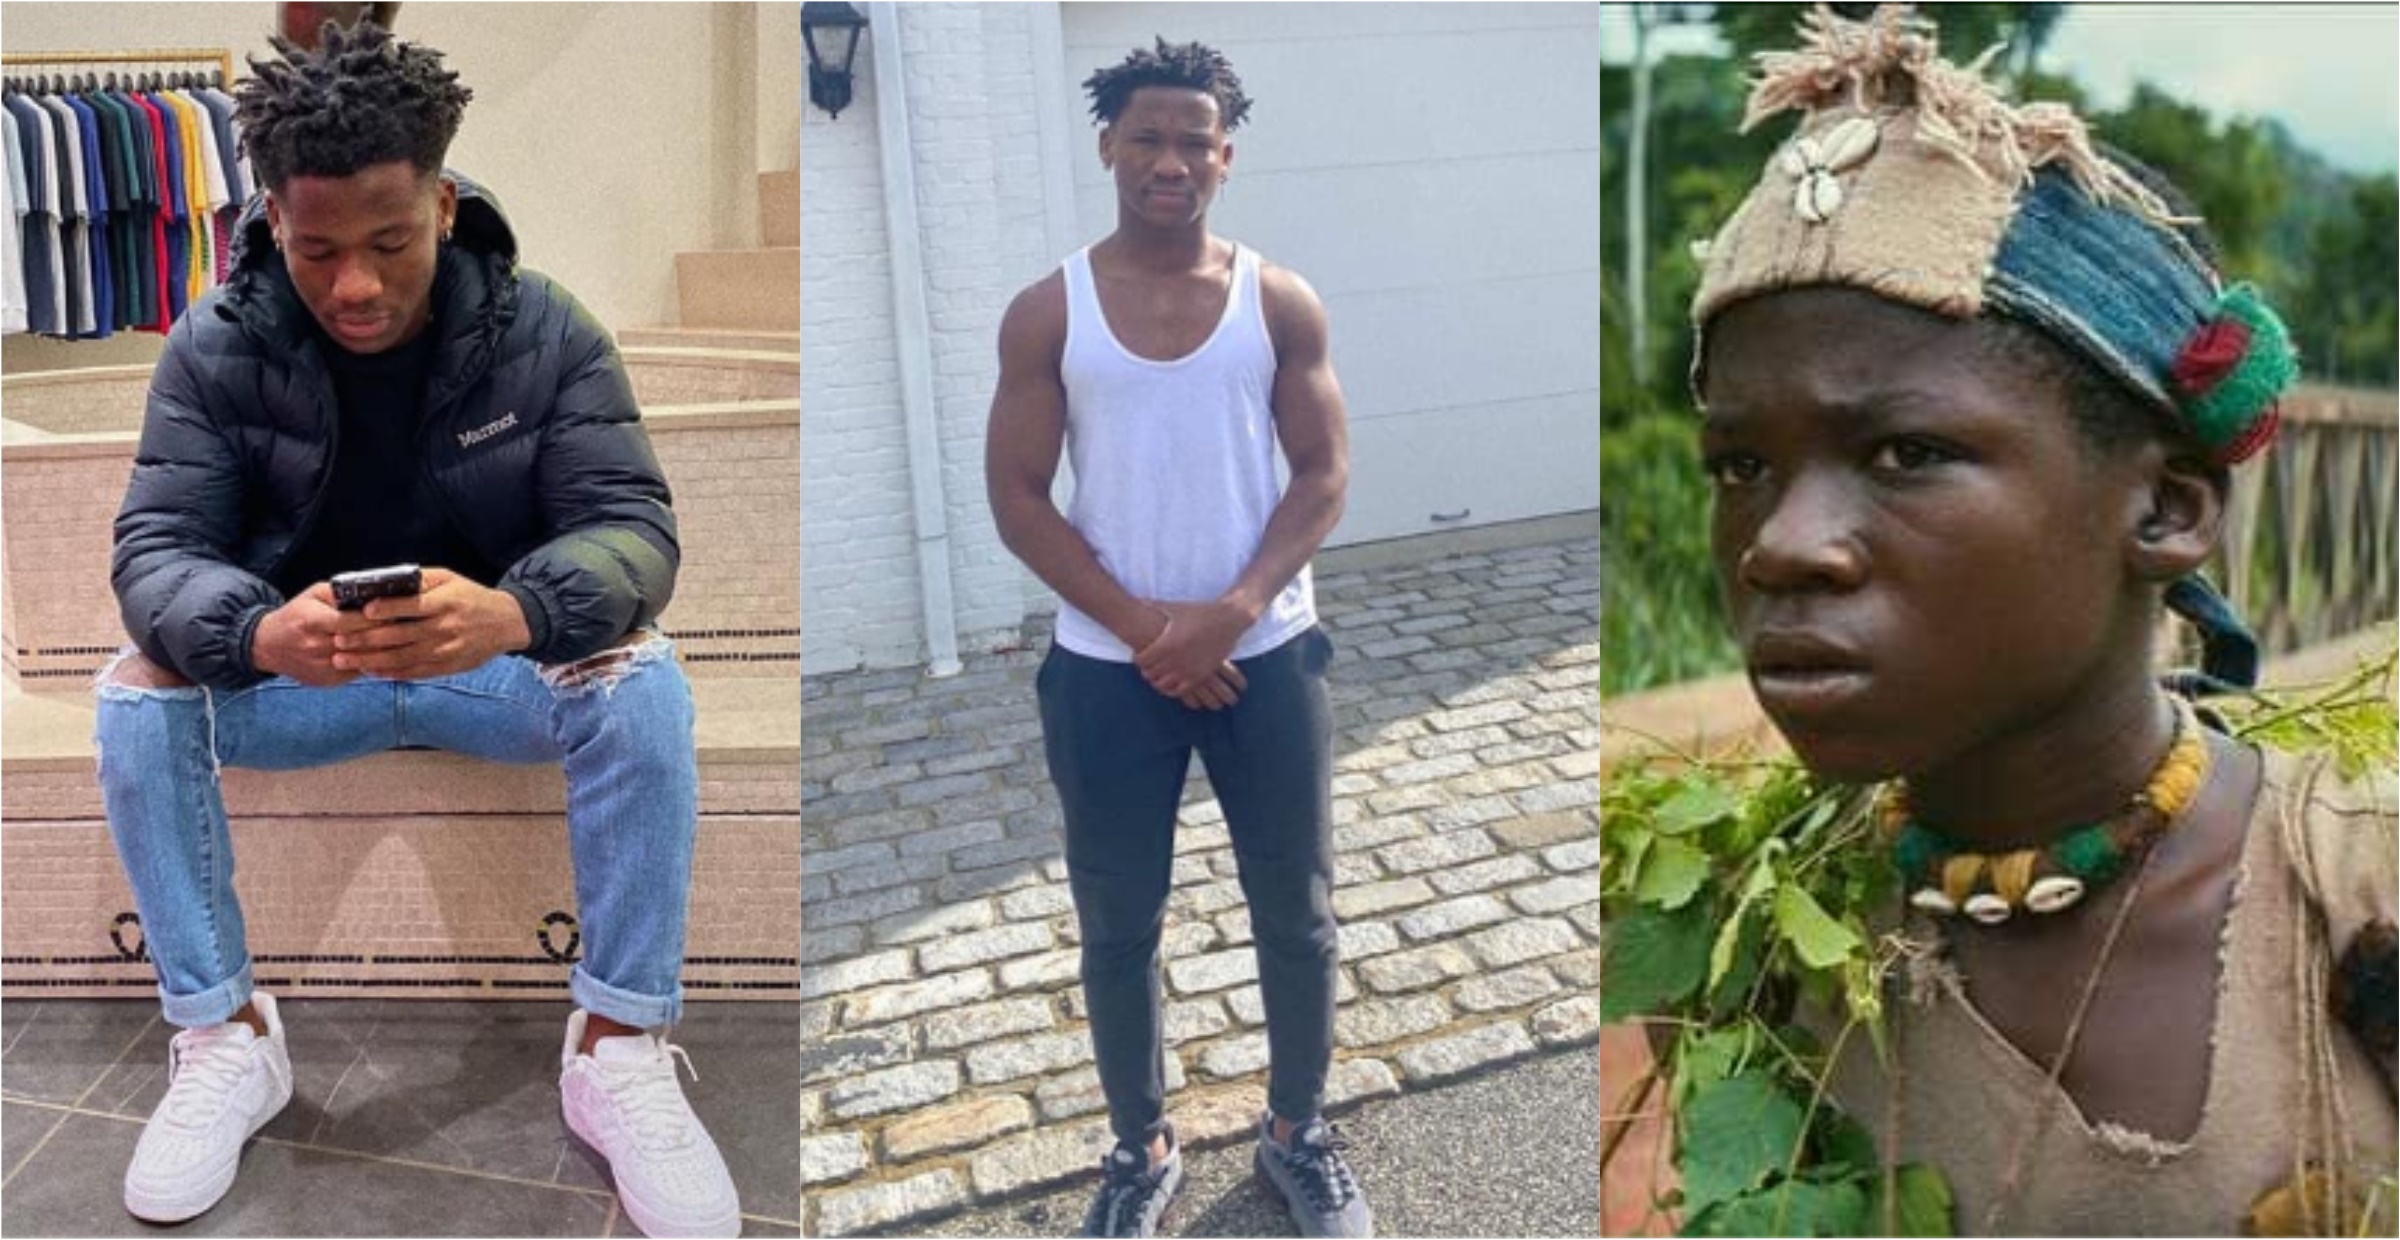 Mad oo: Abraham Attah releases new photos from school in US, his long rasta hair causes stir